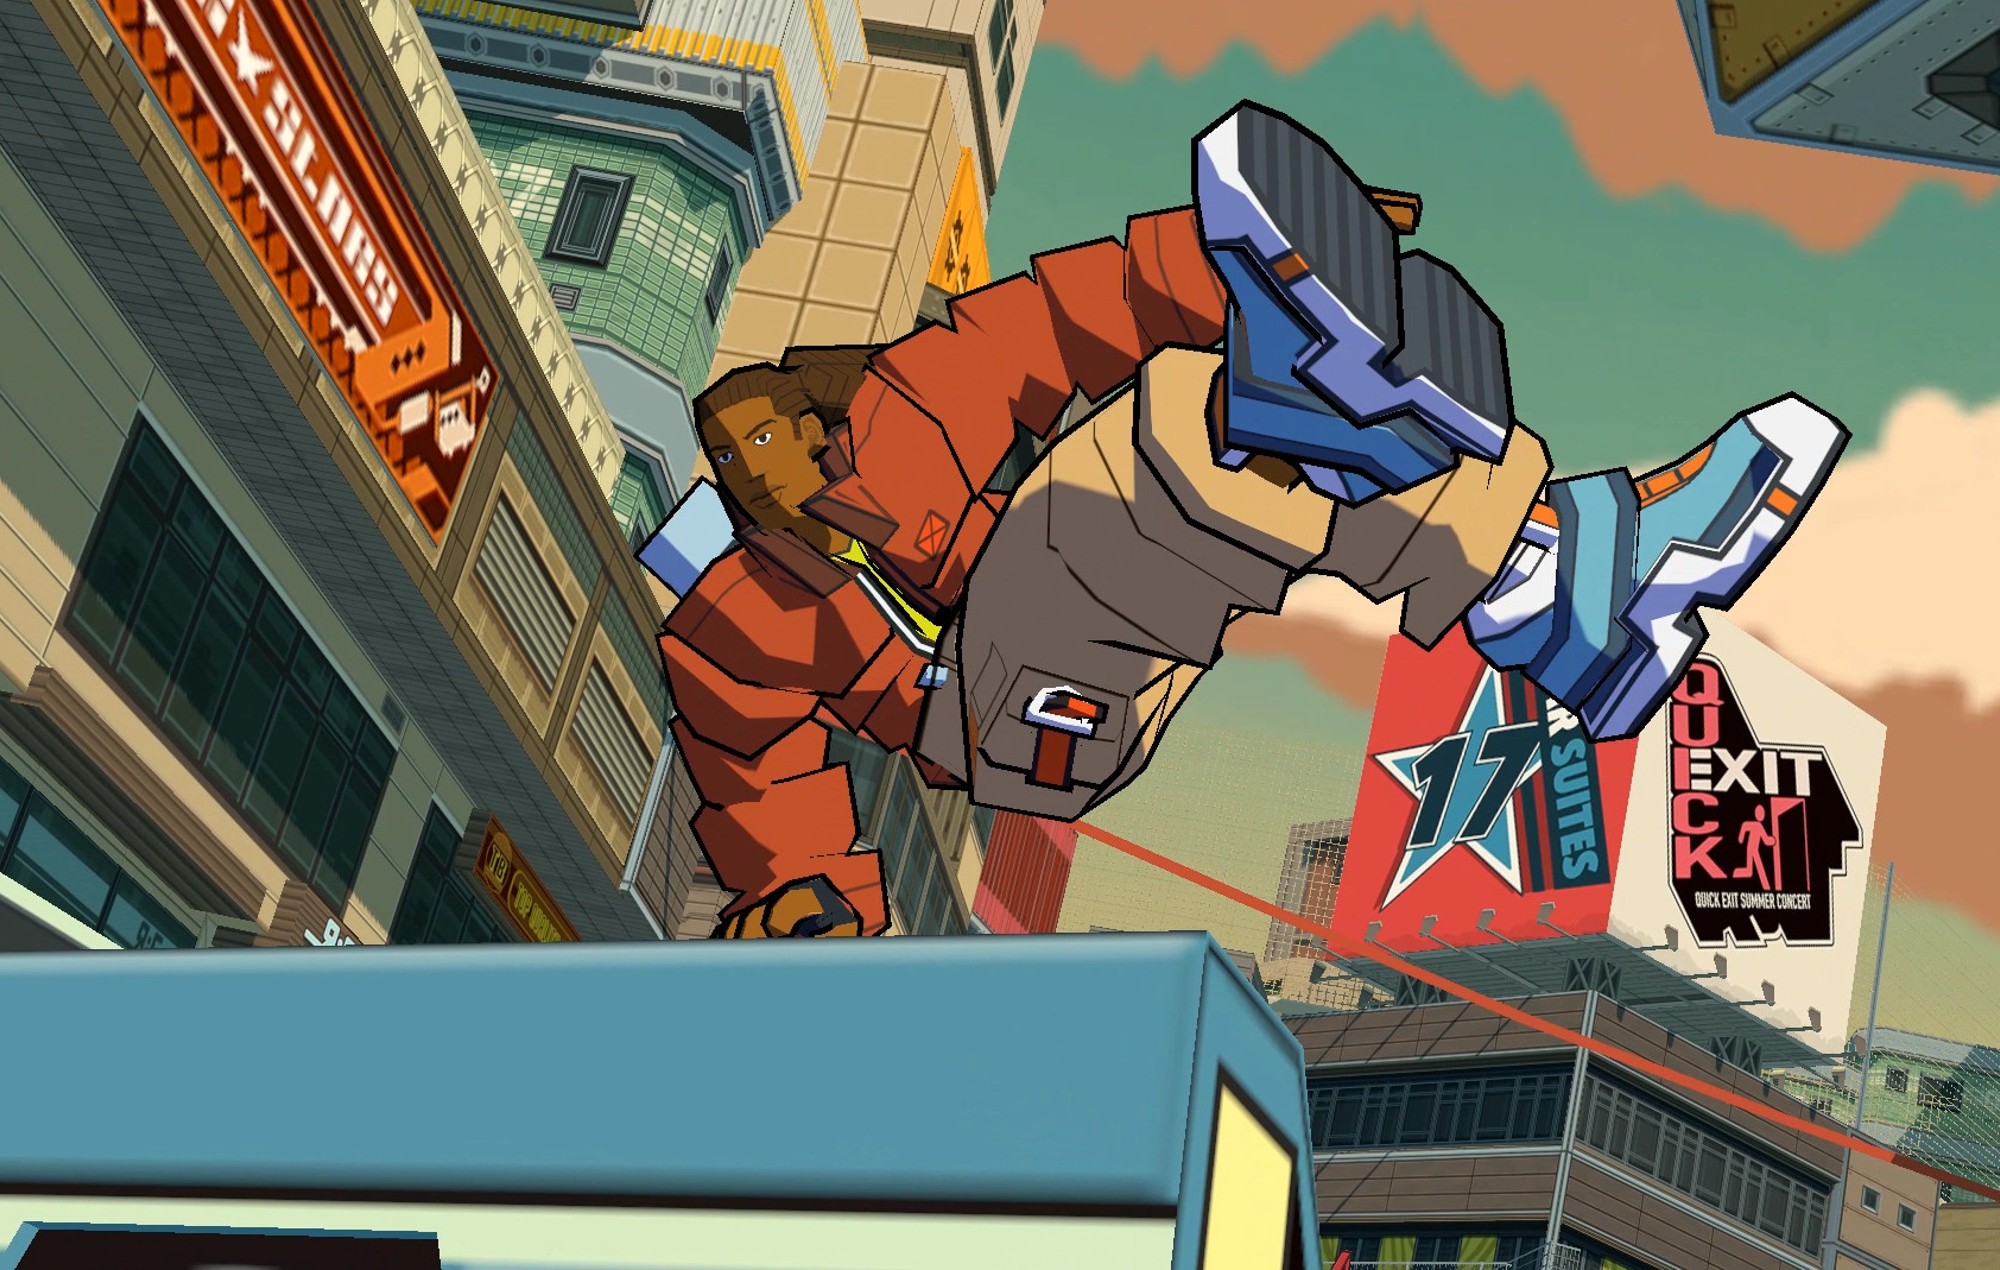 ‘Jet Set Radio’-inspired ‘Bomb Rush Cyberfunk’ comes to consoles in September